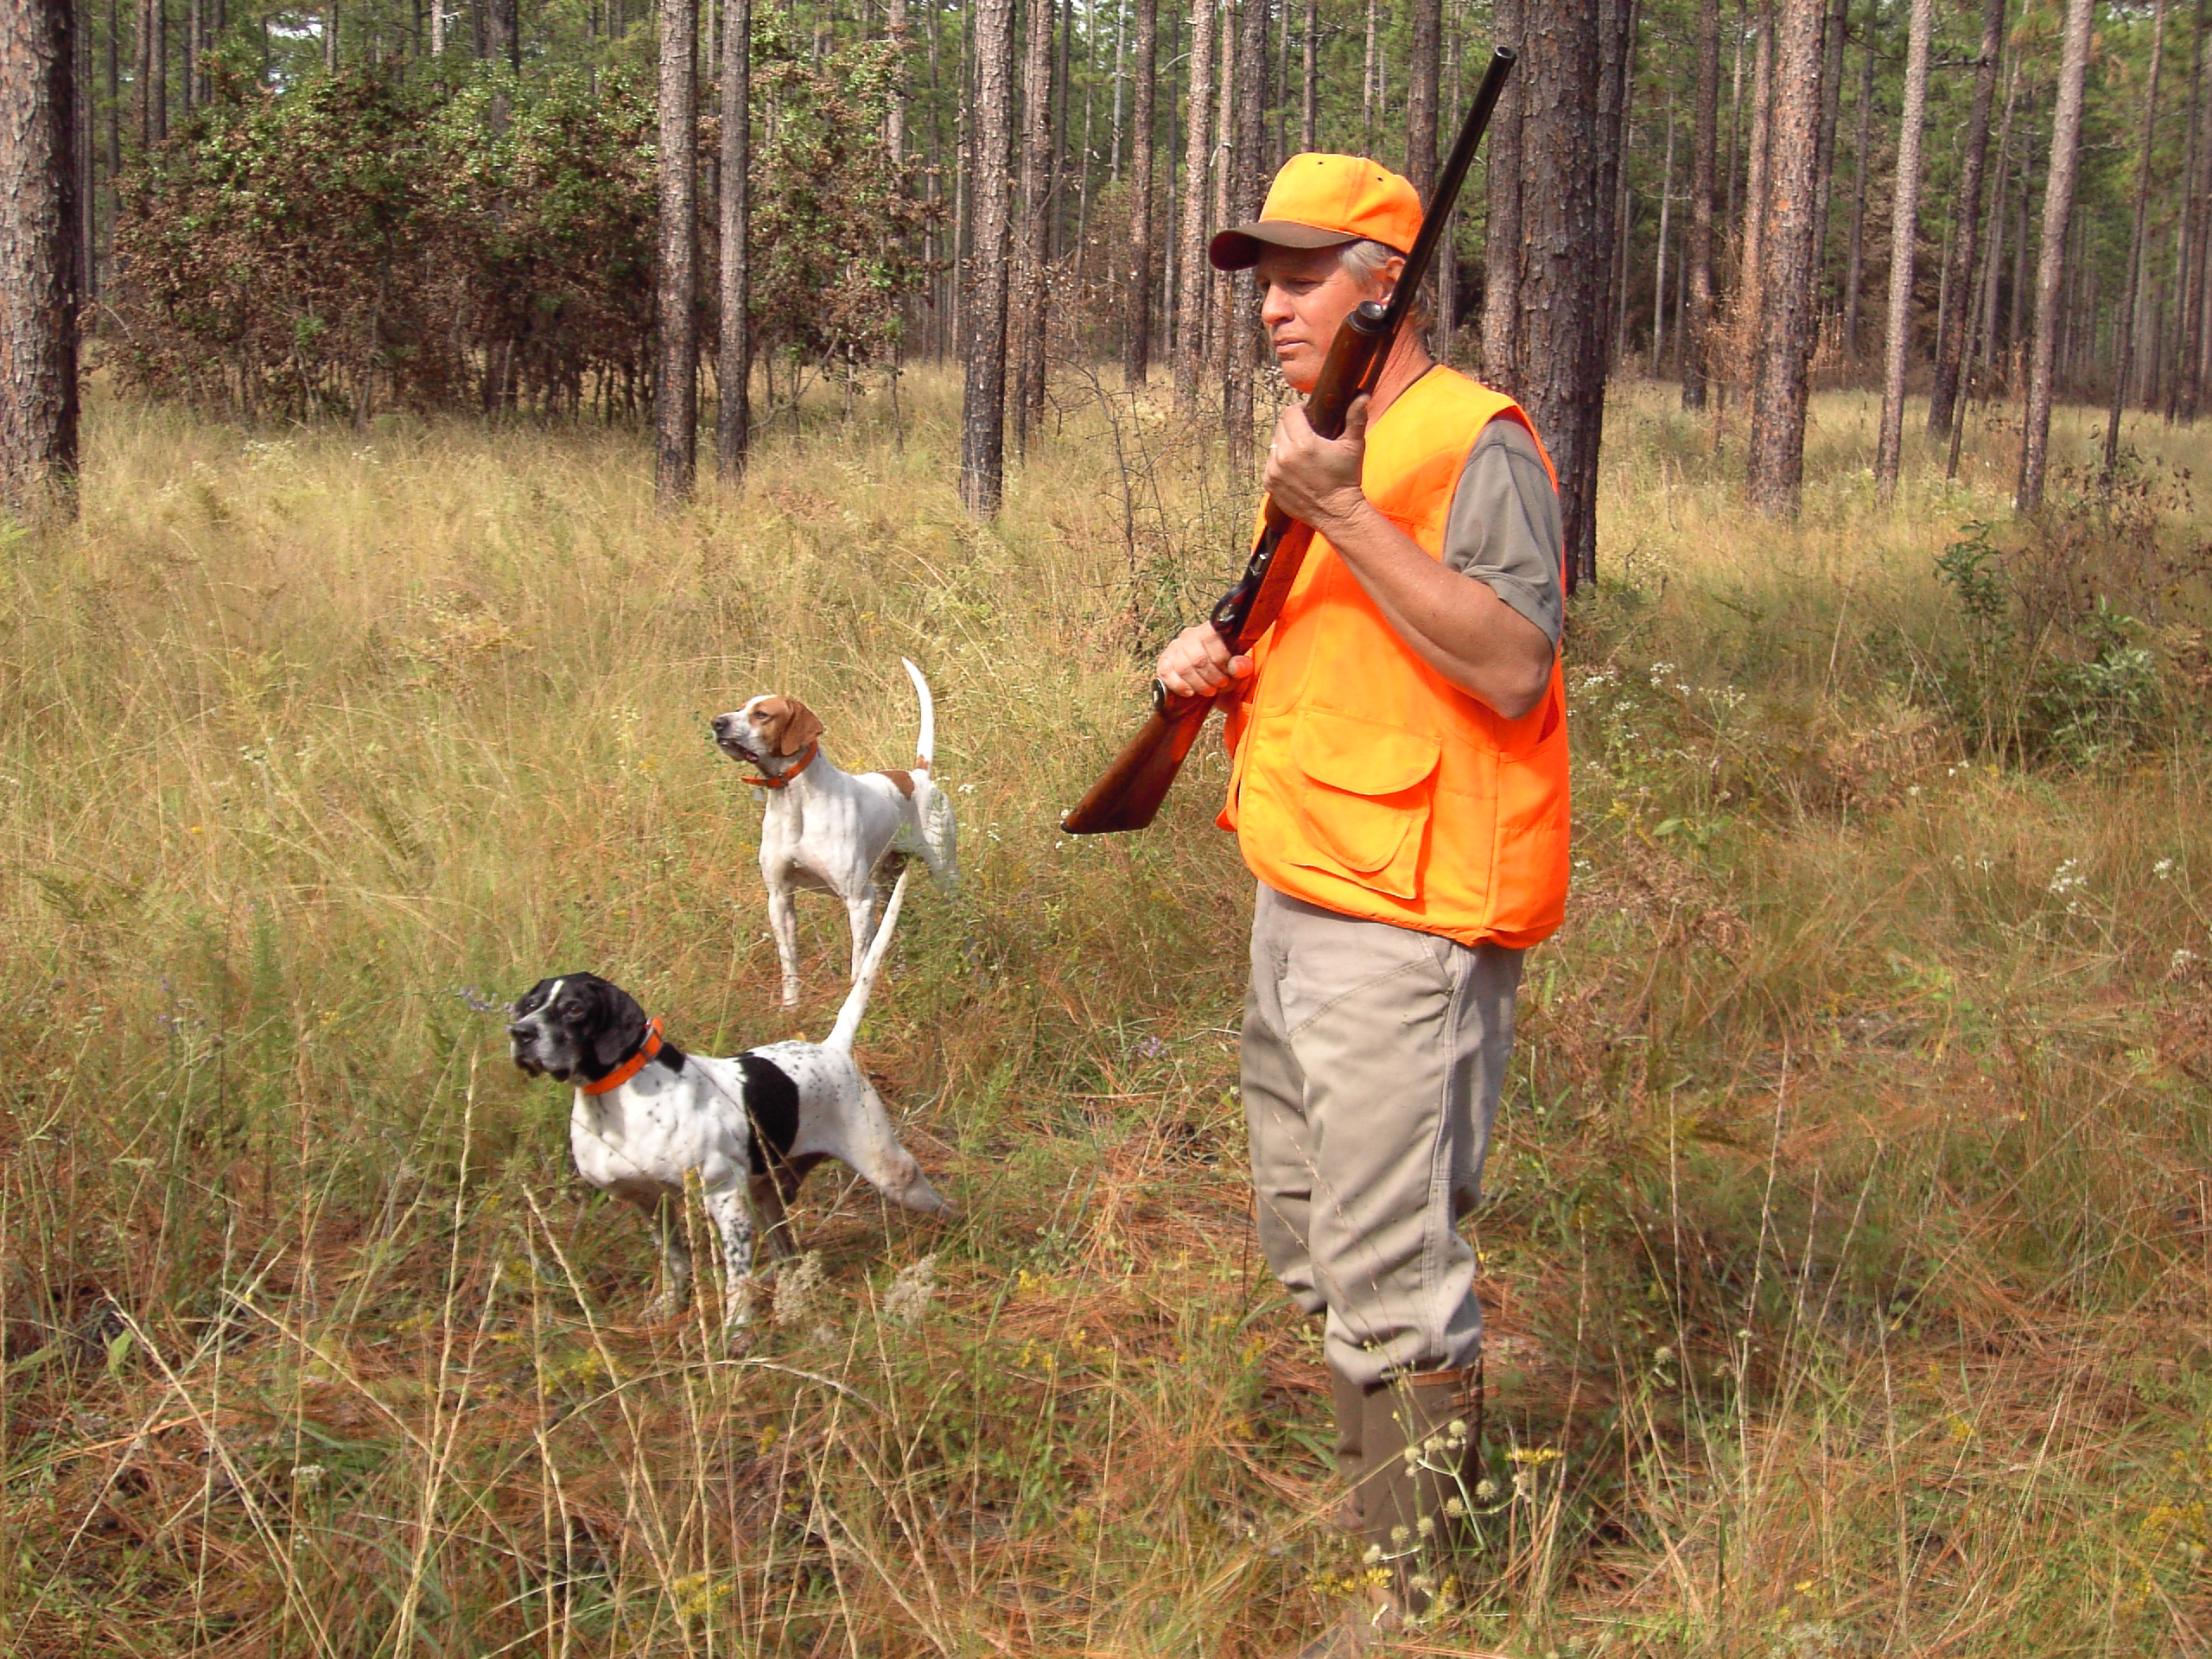 Midterm Election Ballot Amendments: What’s up with the Right to Hunt and Fish Amendment? – The